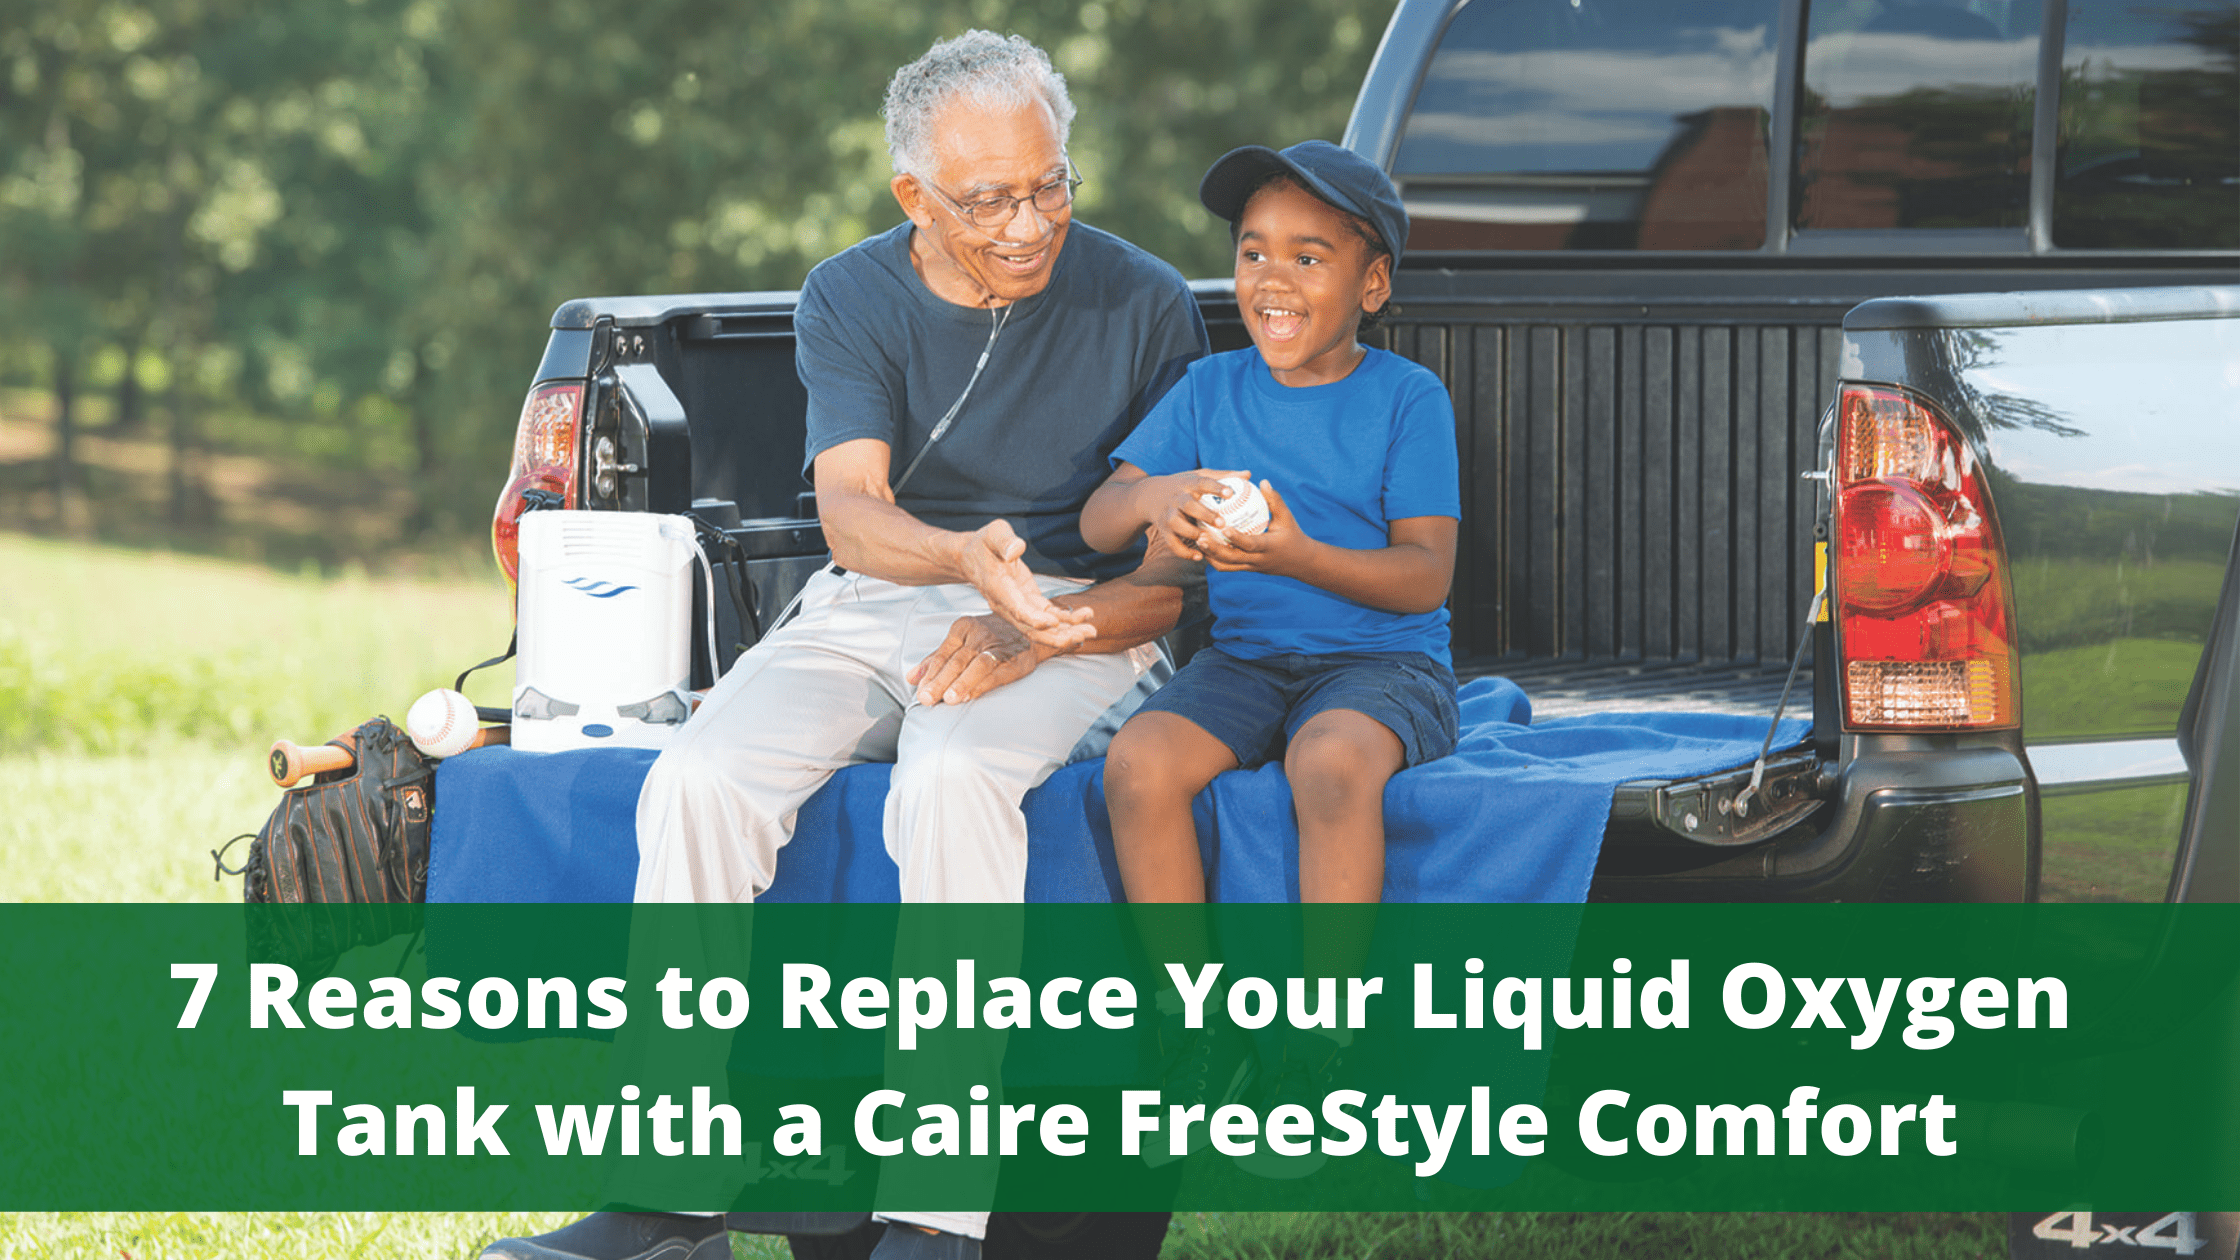 7 Reasons to Replace Your Liquid Oxygen Tank with a Caire FreeStyle Comfort